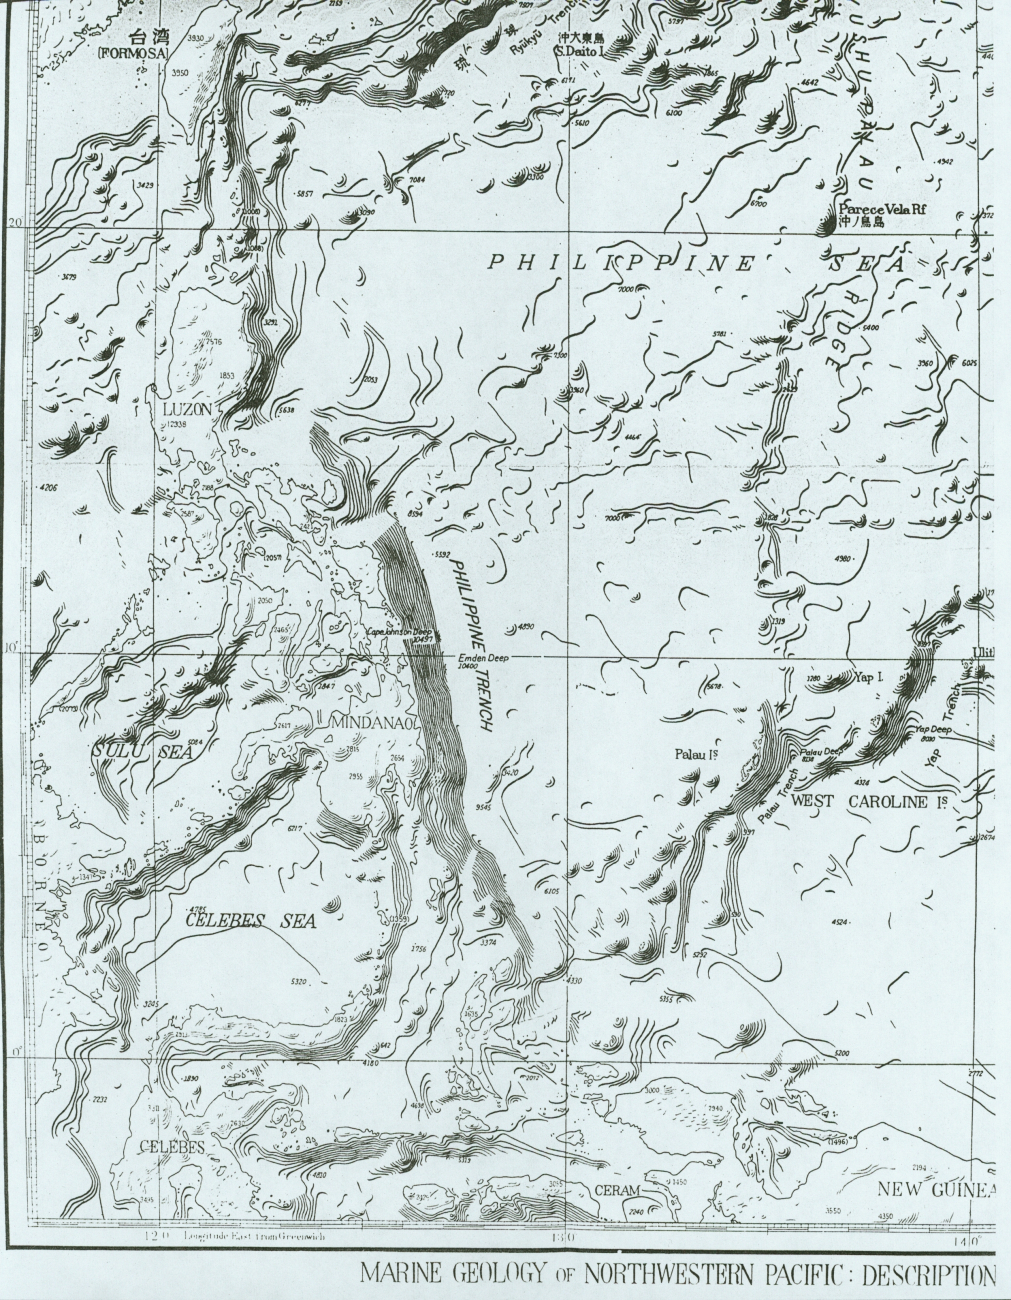 Section of Bathymetric Chart of the Northwest Pacific showingPhilippine Trench, Yap Trench, and Palau Trench bordering Philippine Sea